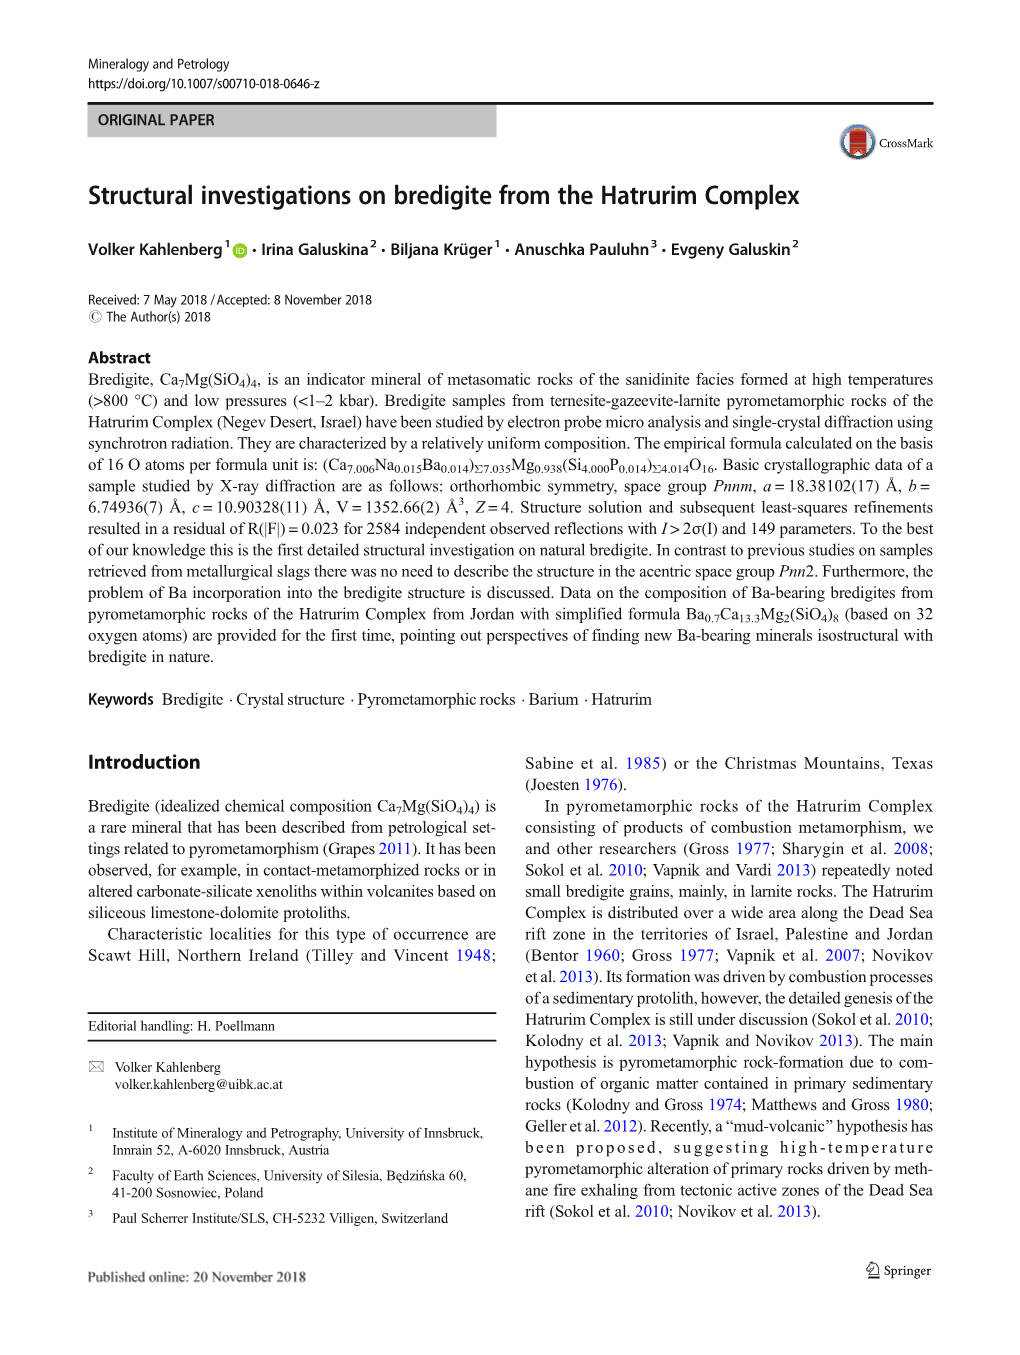 Structural Investigations on Bredigite from the Hatrurim Complex